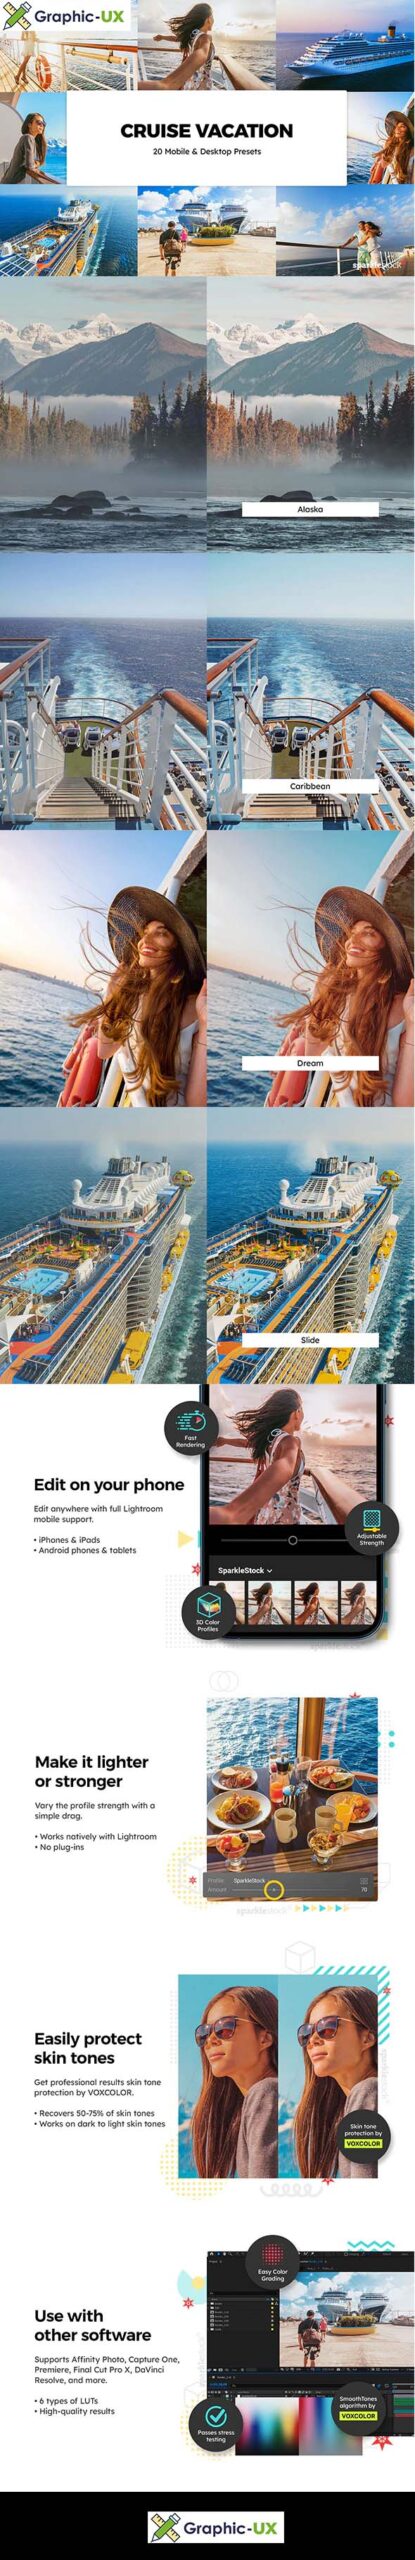 20 Cruise Vacation Lightroom Presets & LUTs